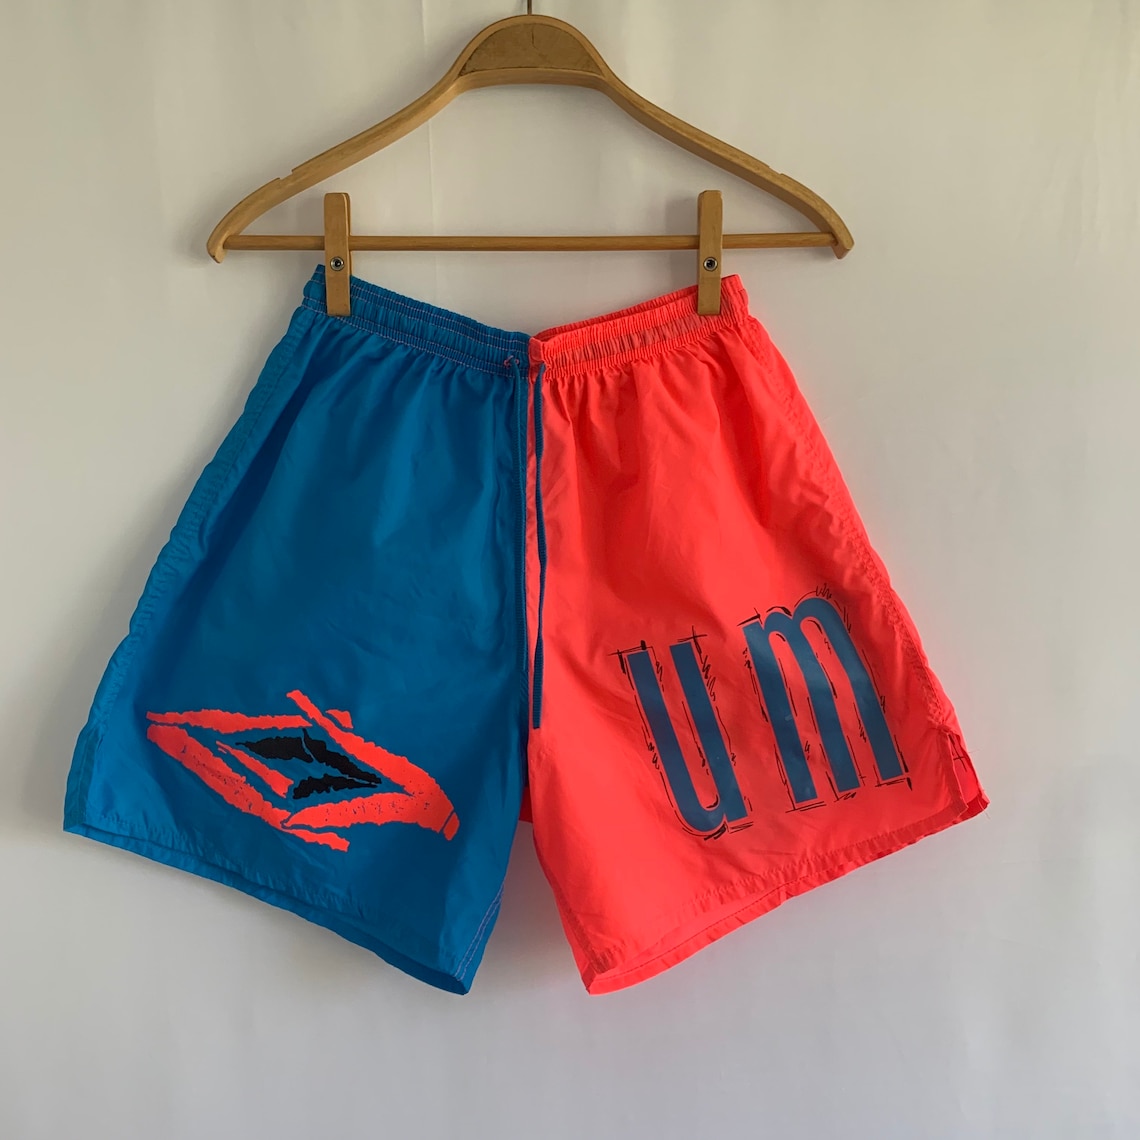 80s UMBRO Shorts light weight neon blue & red high rise | Etsy